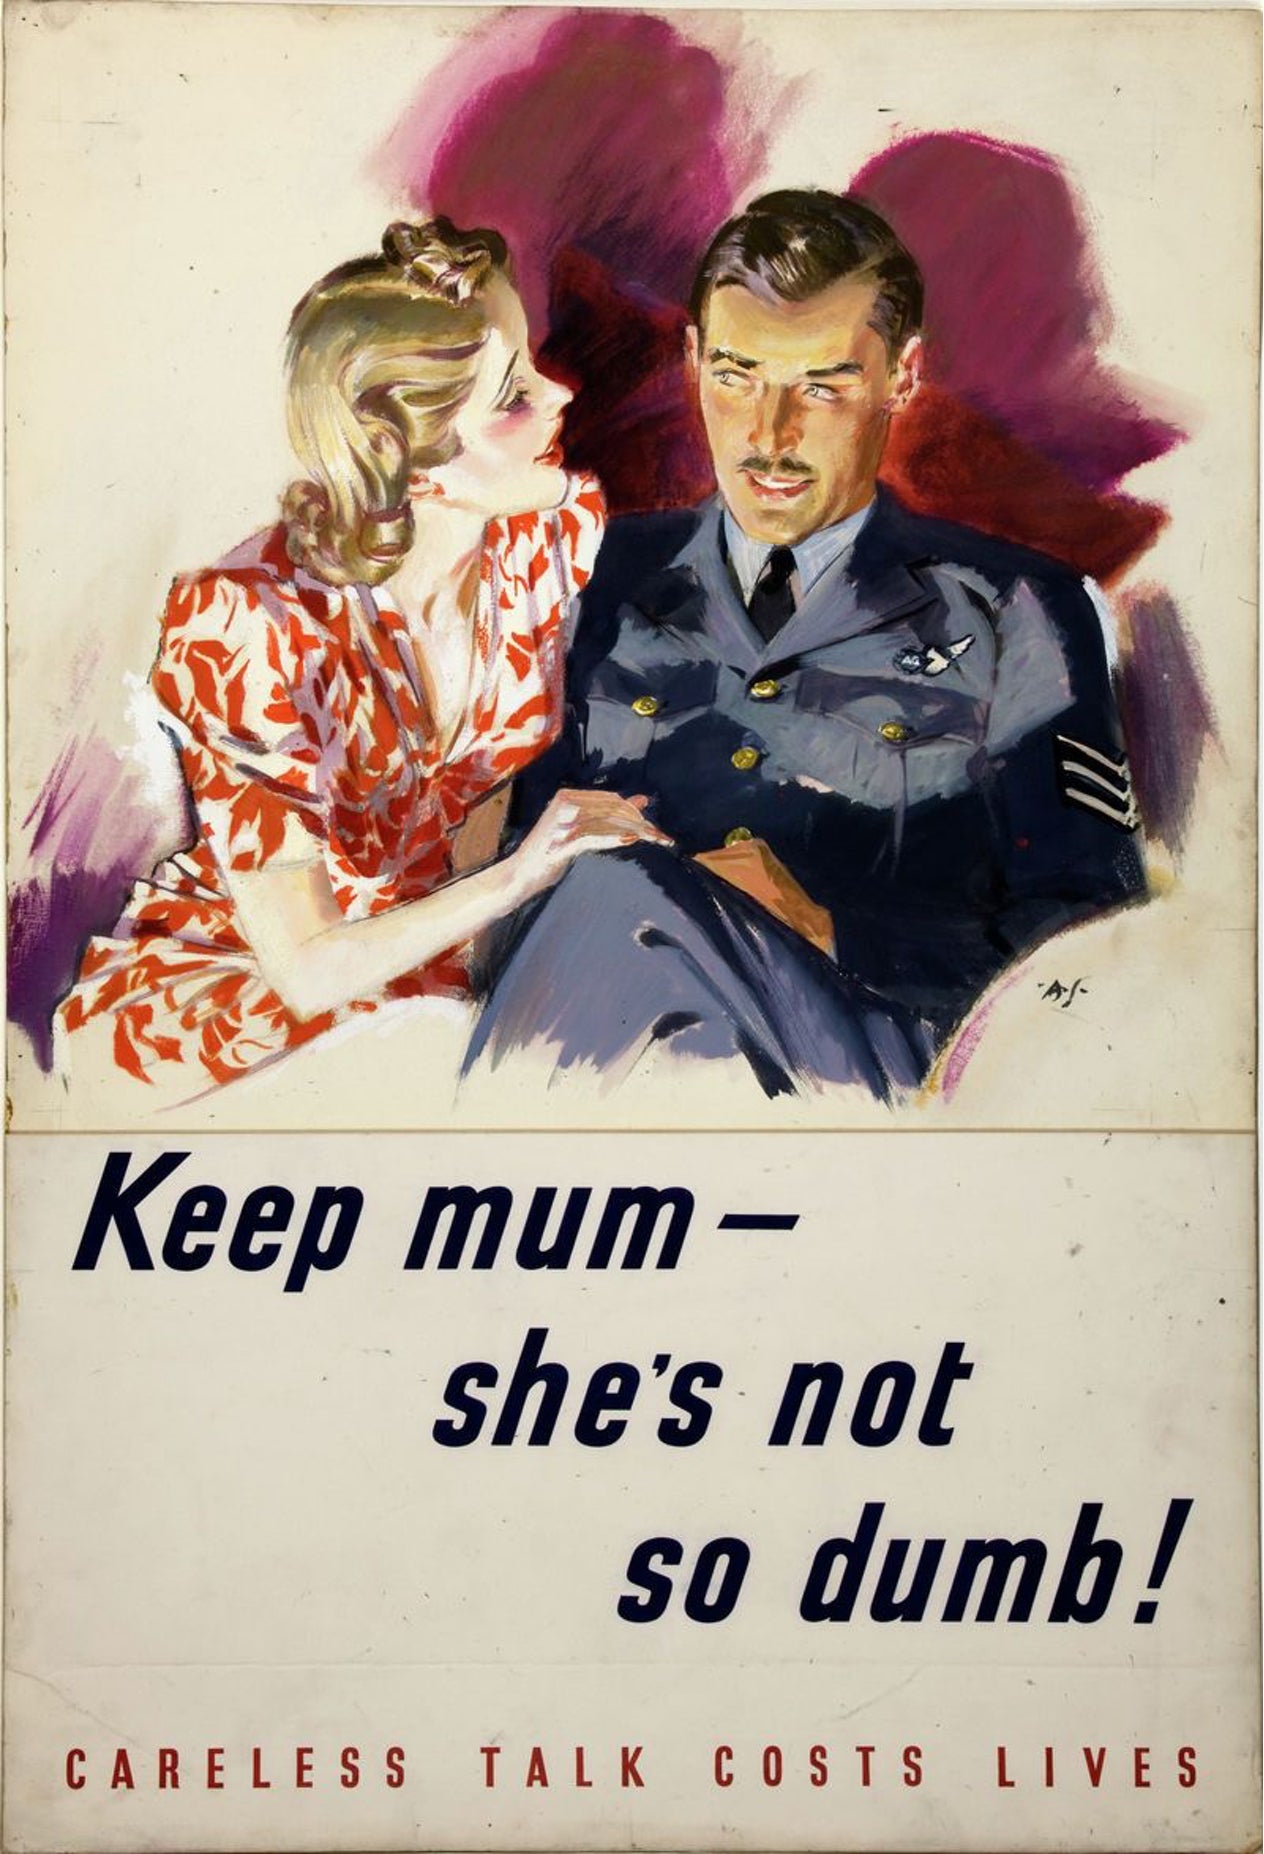 Keep Mum - She's Not So Dumb! - c. 1940 - Keep mum - she's not so dumb! Careless talk costs lives. WW2. Date between 1939 and 1946.